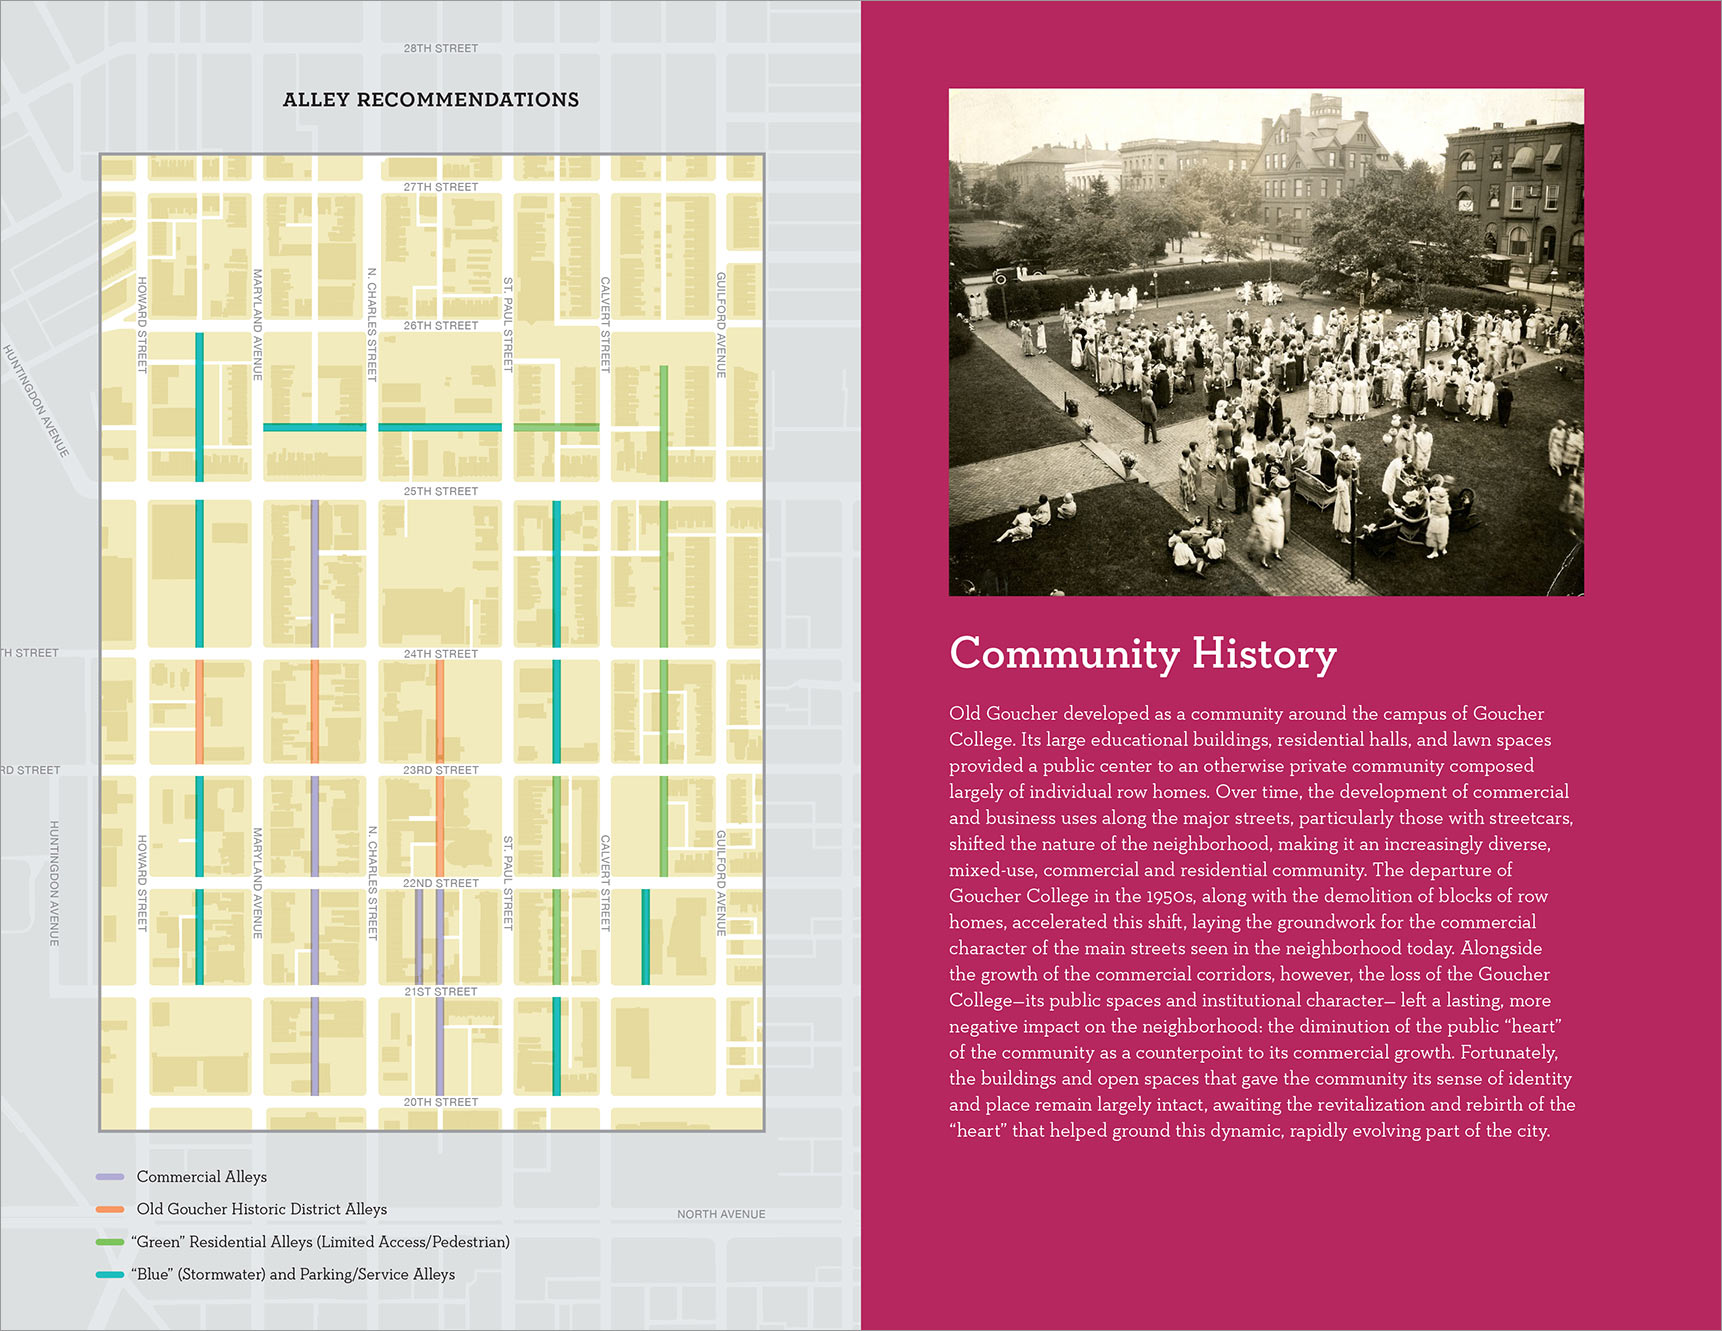 alley recommendations map and community history sidebar from Old Goucher Vision Plan, neighborhood master plan document